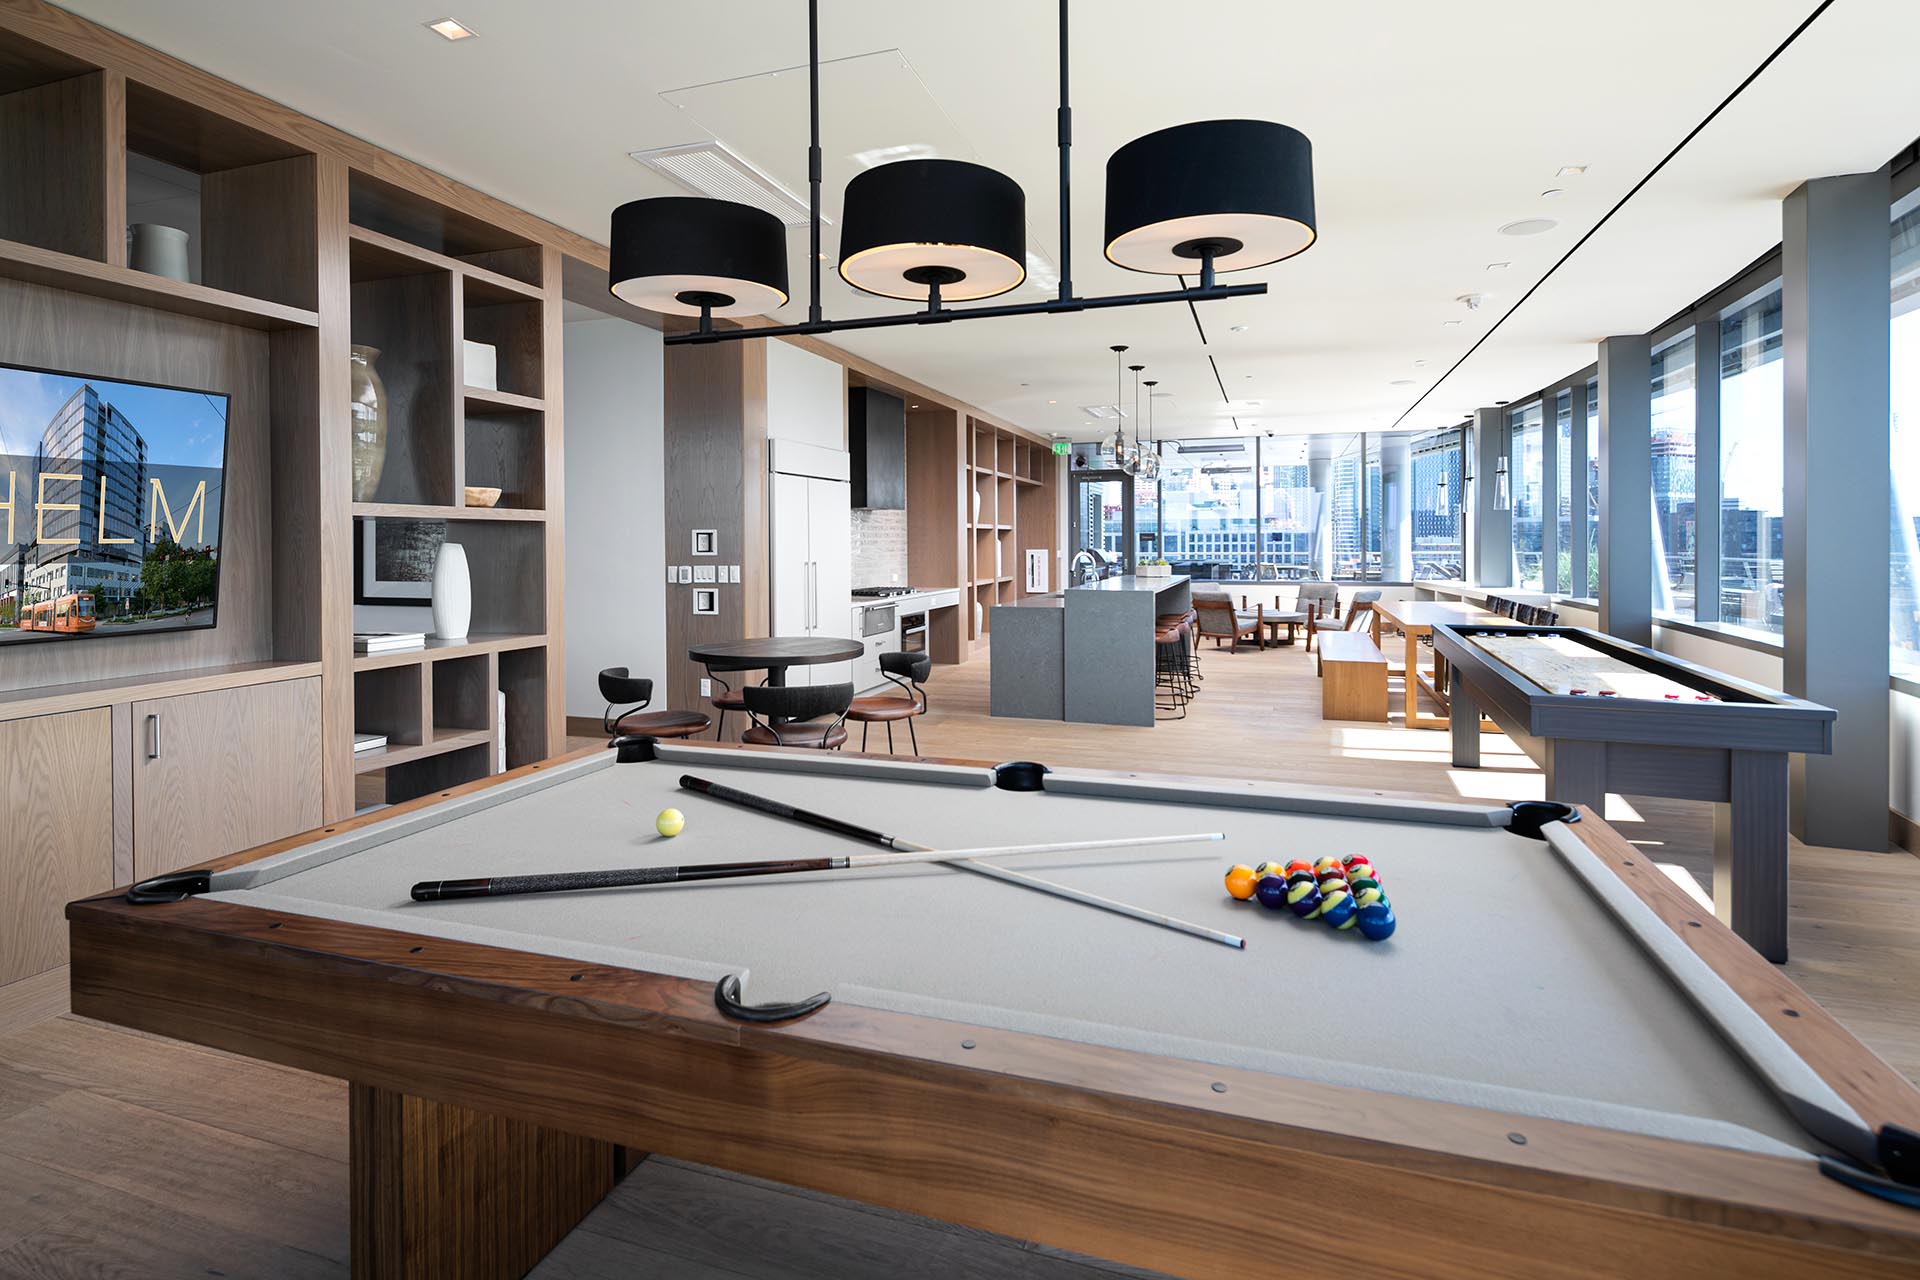 Large game room with a pool table and various table top games, a spacious counter top area and seating throughout